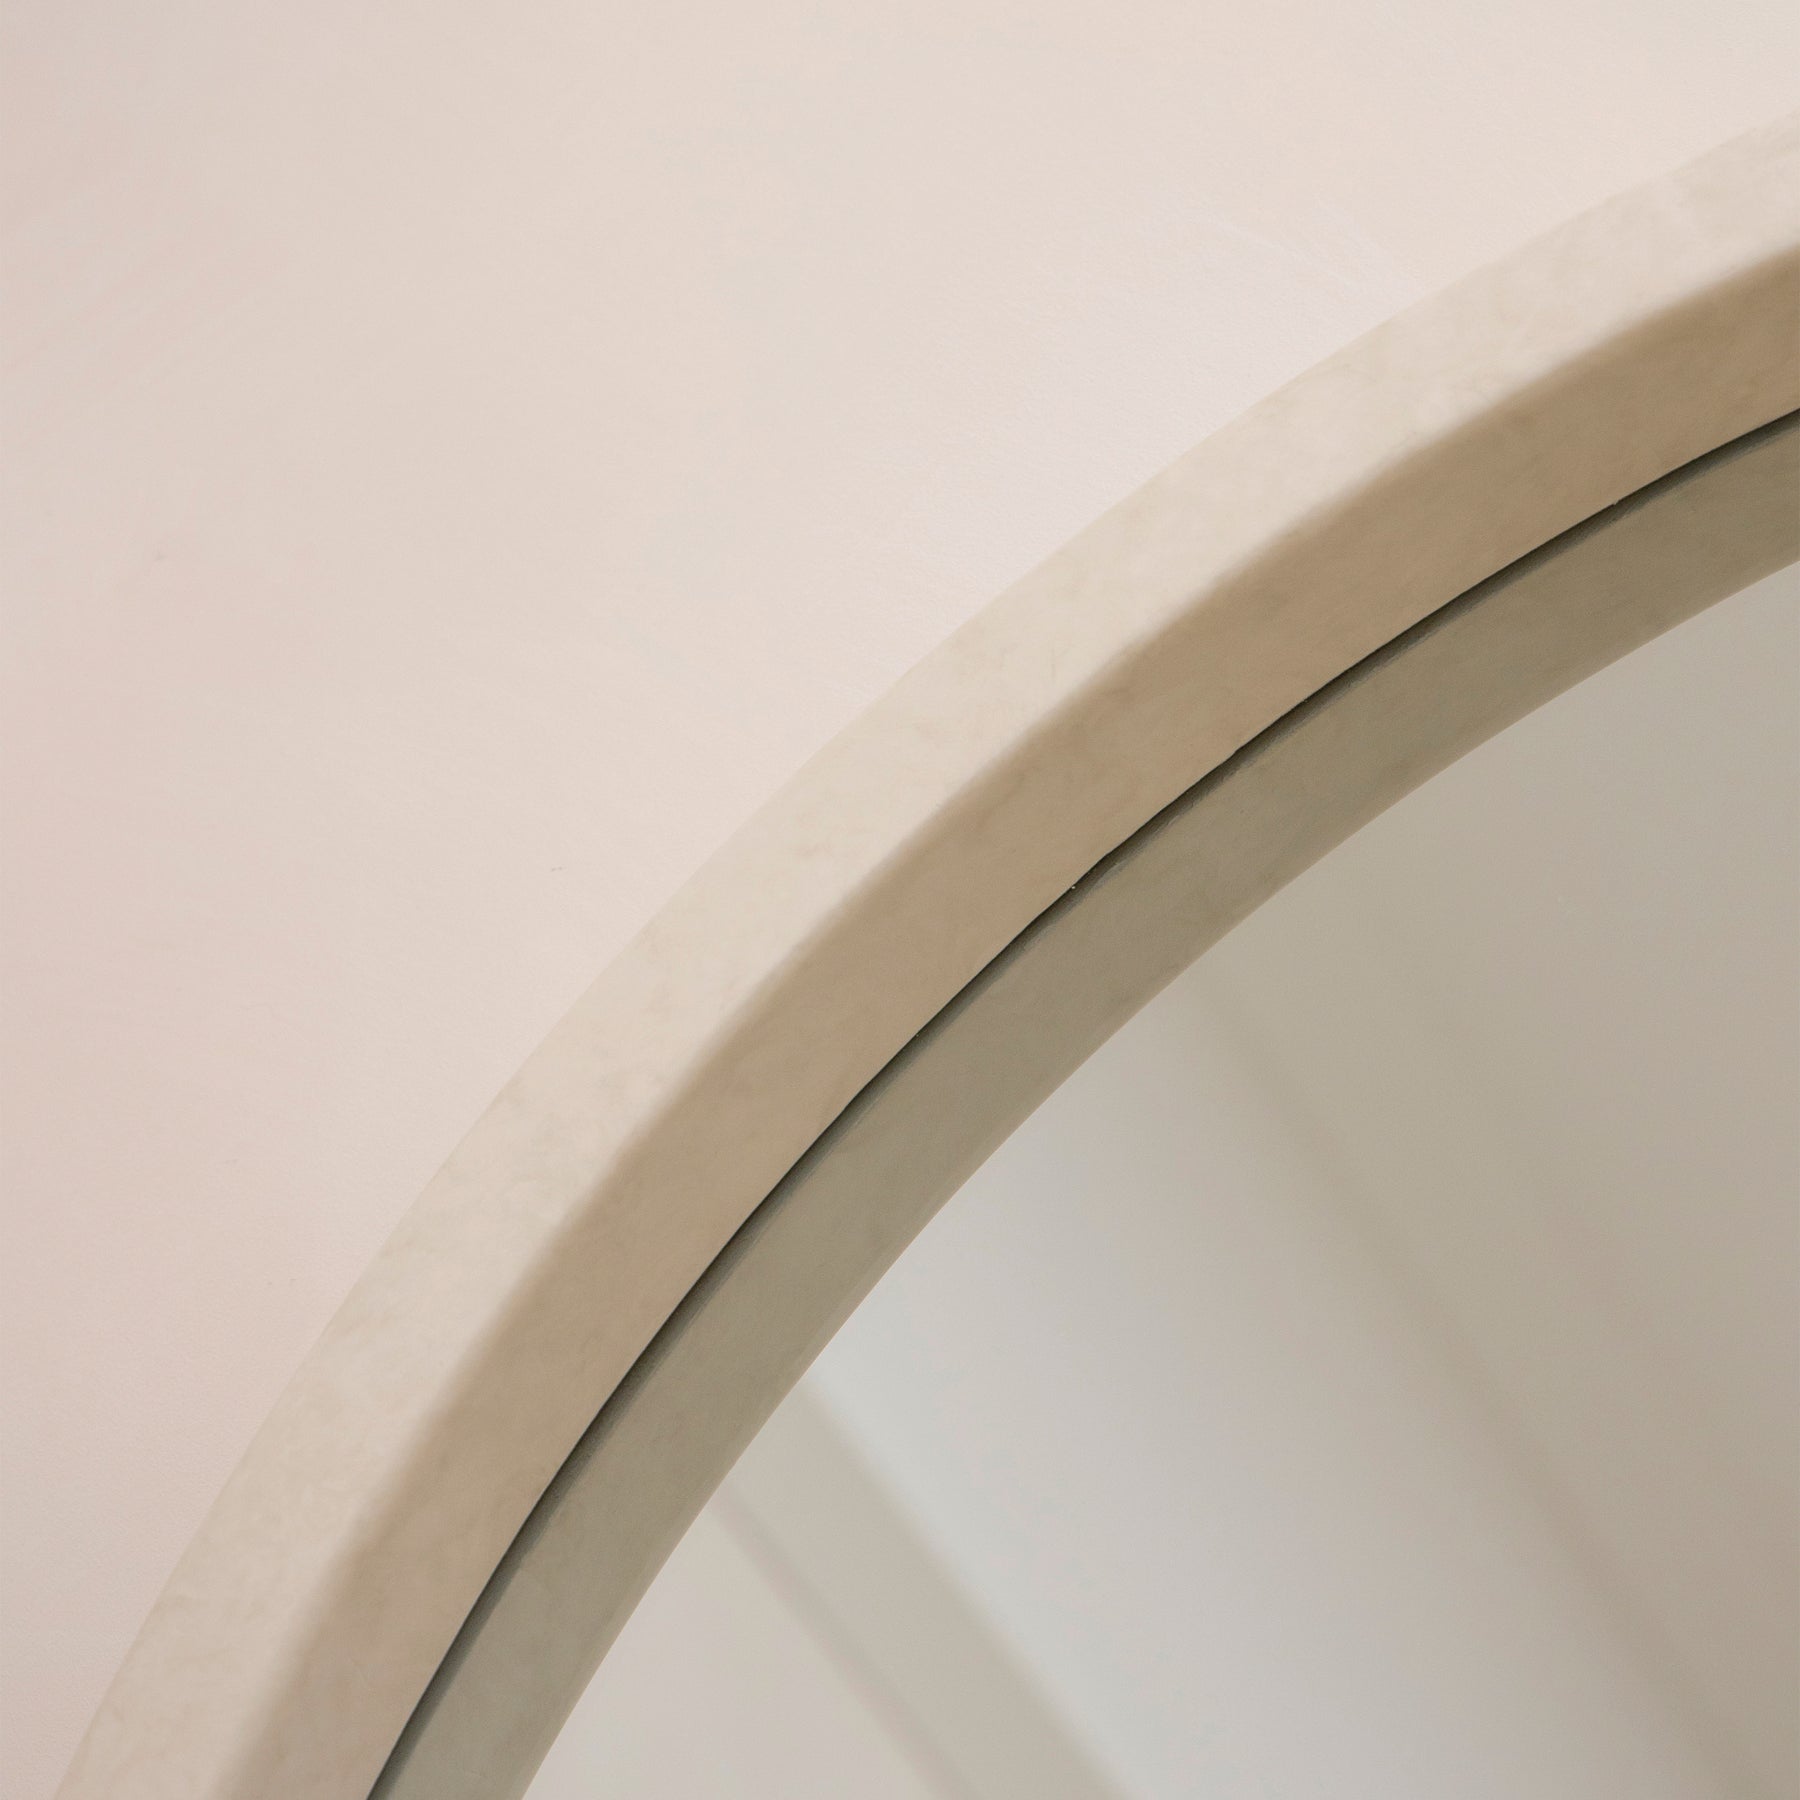 Alternate detail shot of Full Length Extra Large Arched Concrete Mirror arched frame design